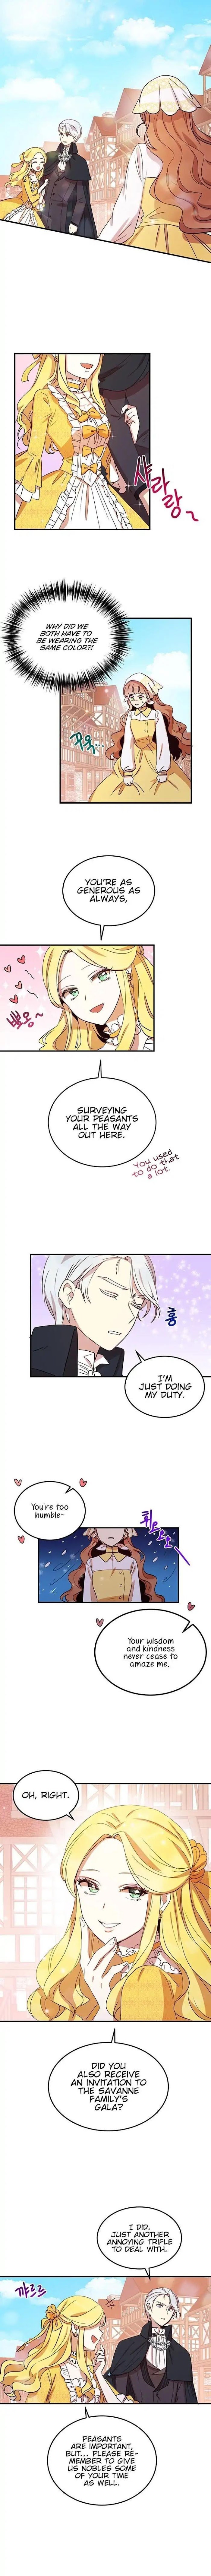 Why Are You Doing This, My Duke!? Webtoon - chapter 16 - #1